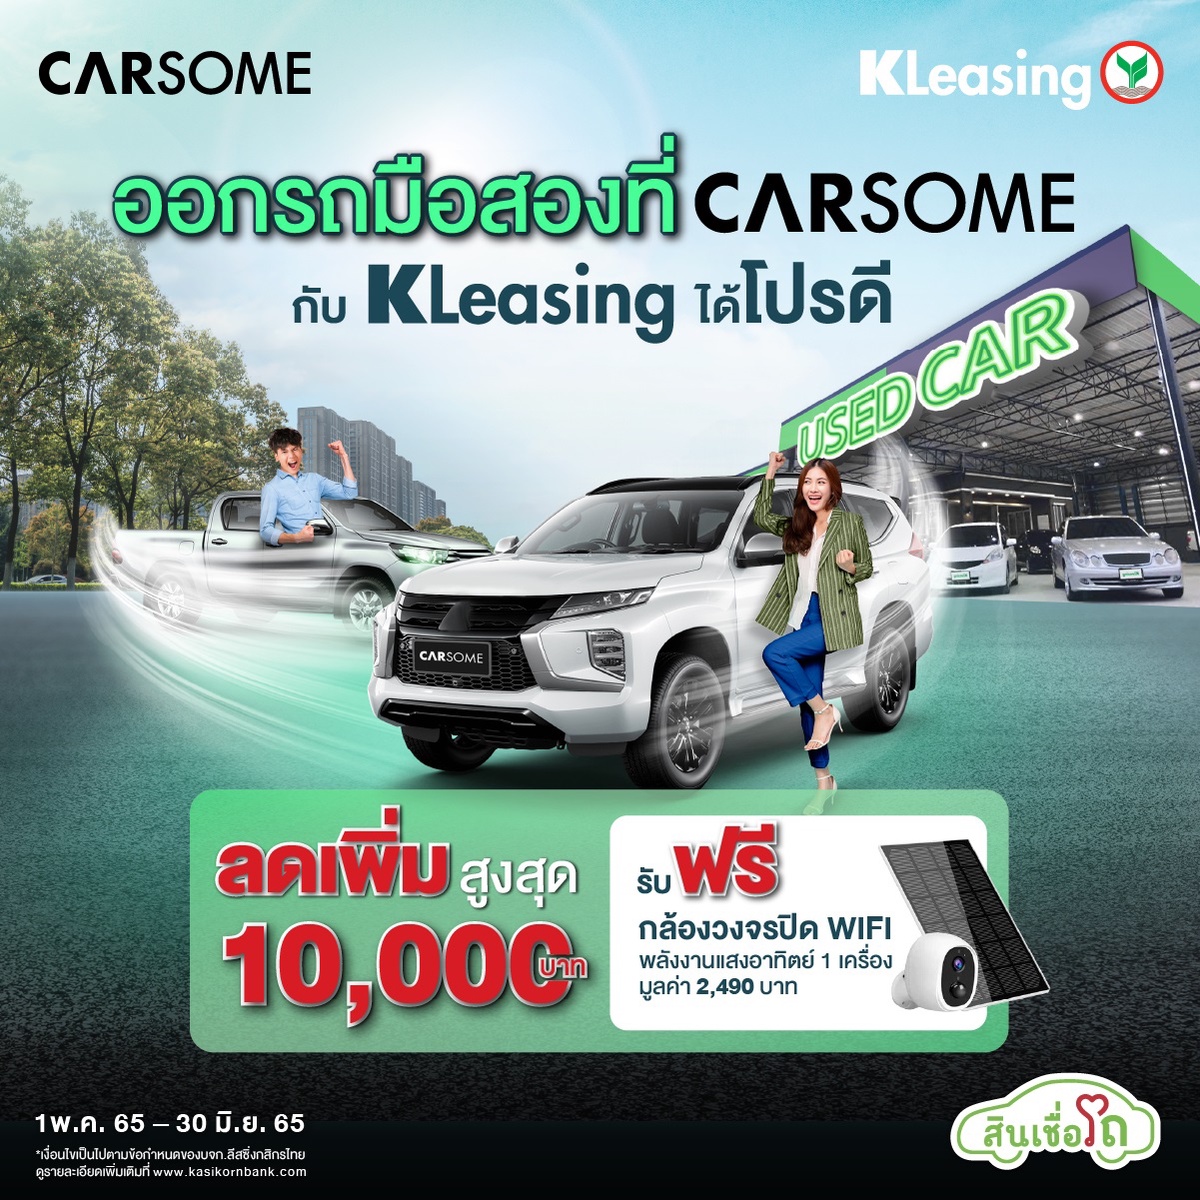 KLeasing joins with Carsome in launching a pre-owned car loan campaign, with maximum loan limit of 100% and low-interest installment payment plans offered